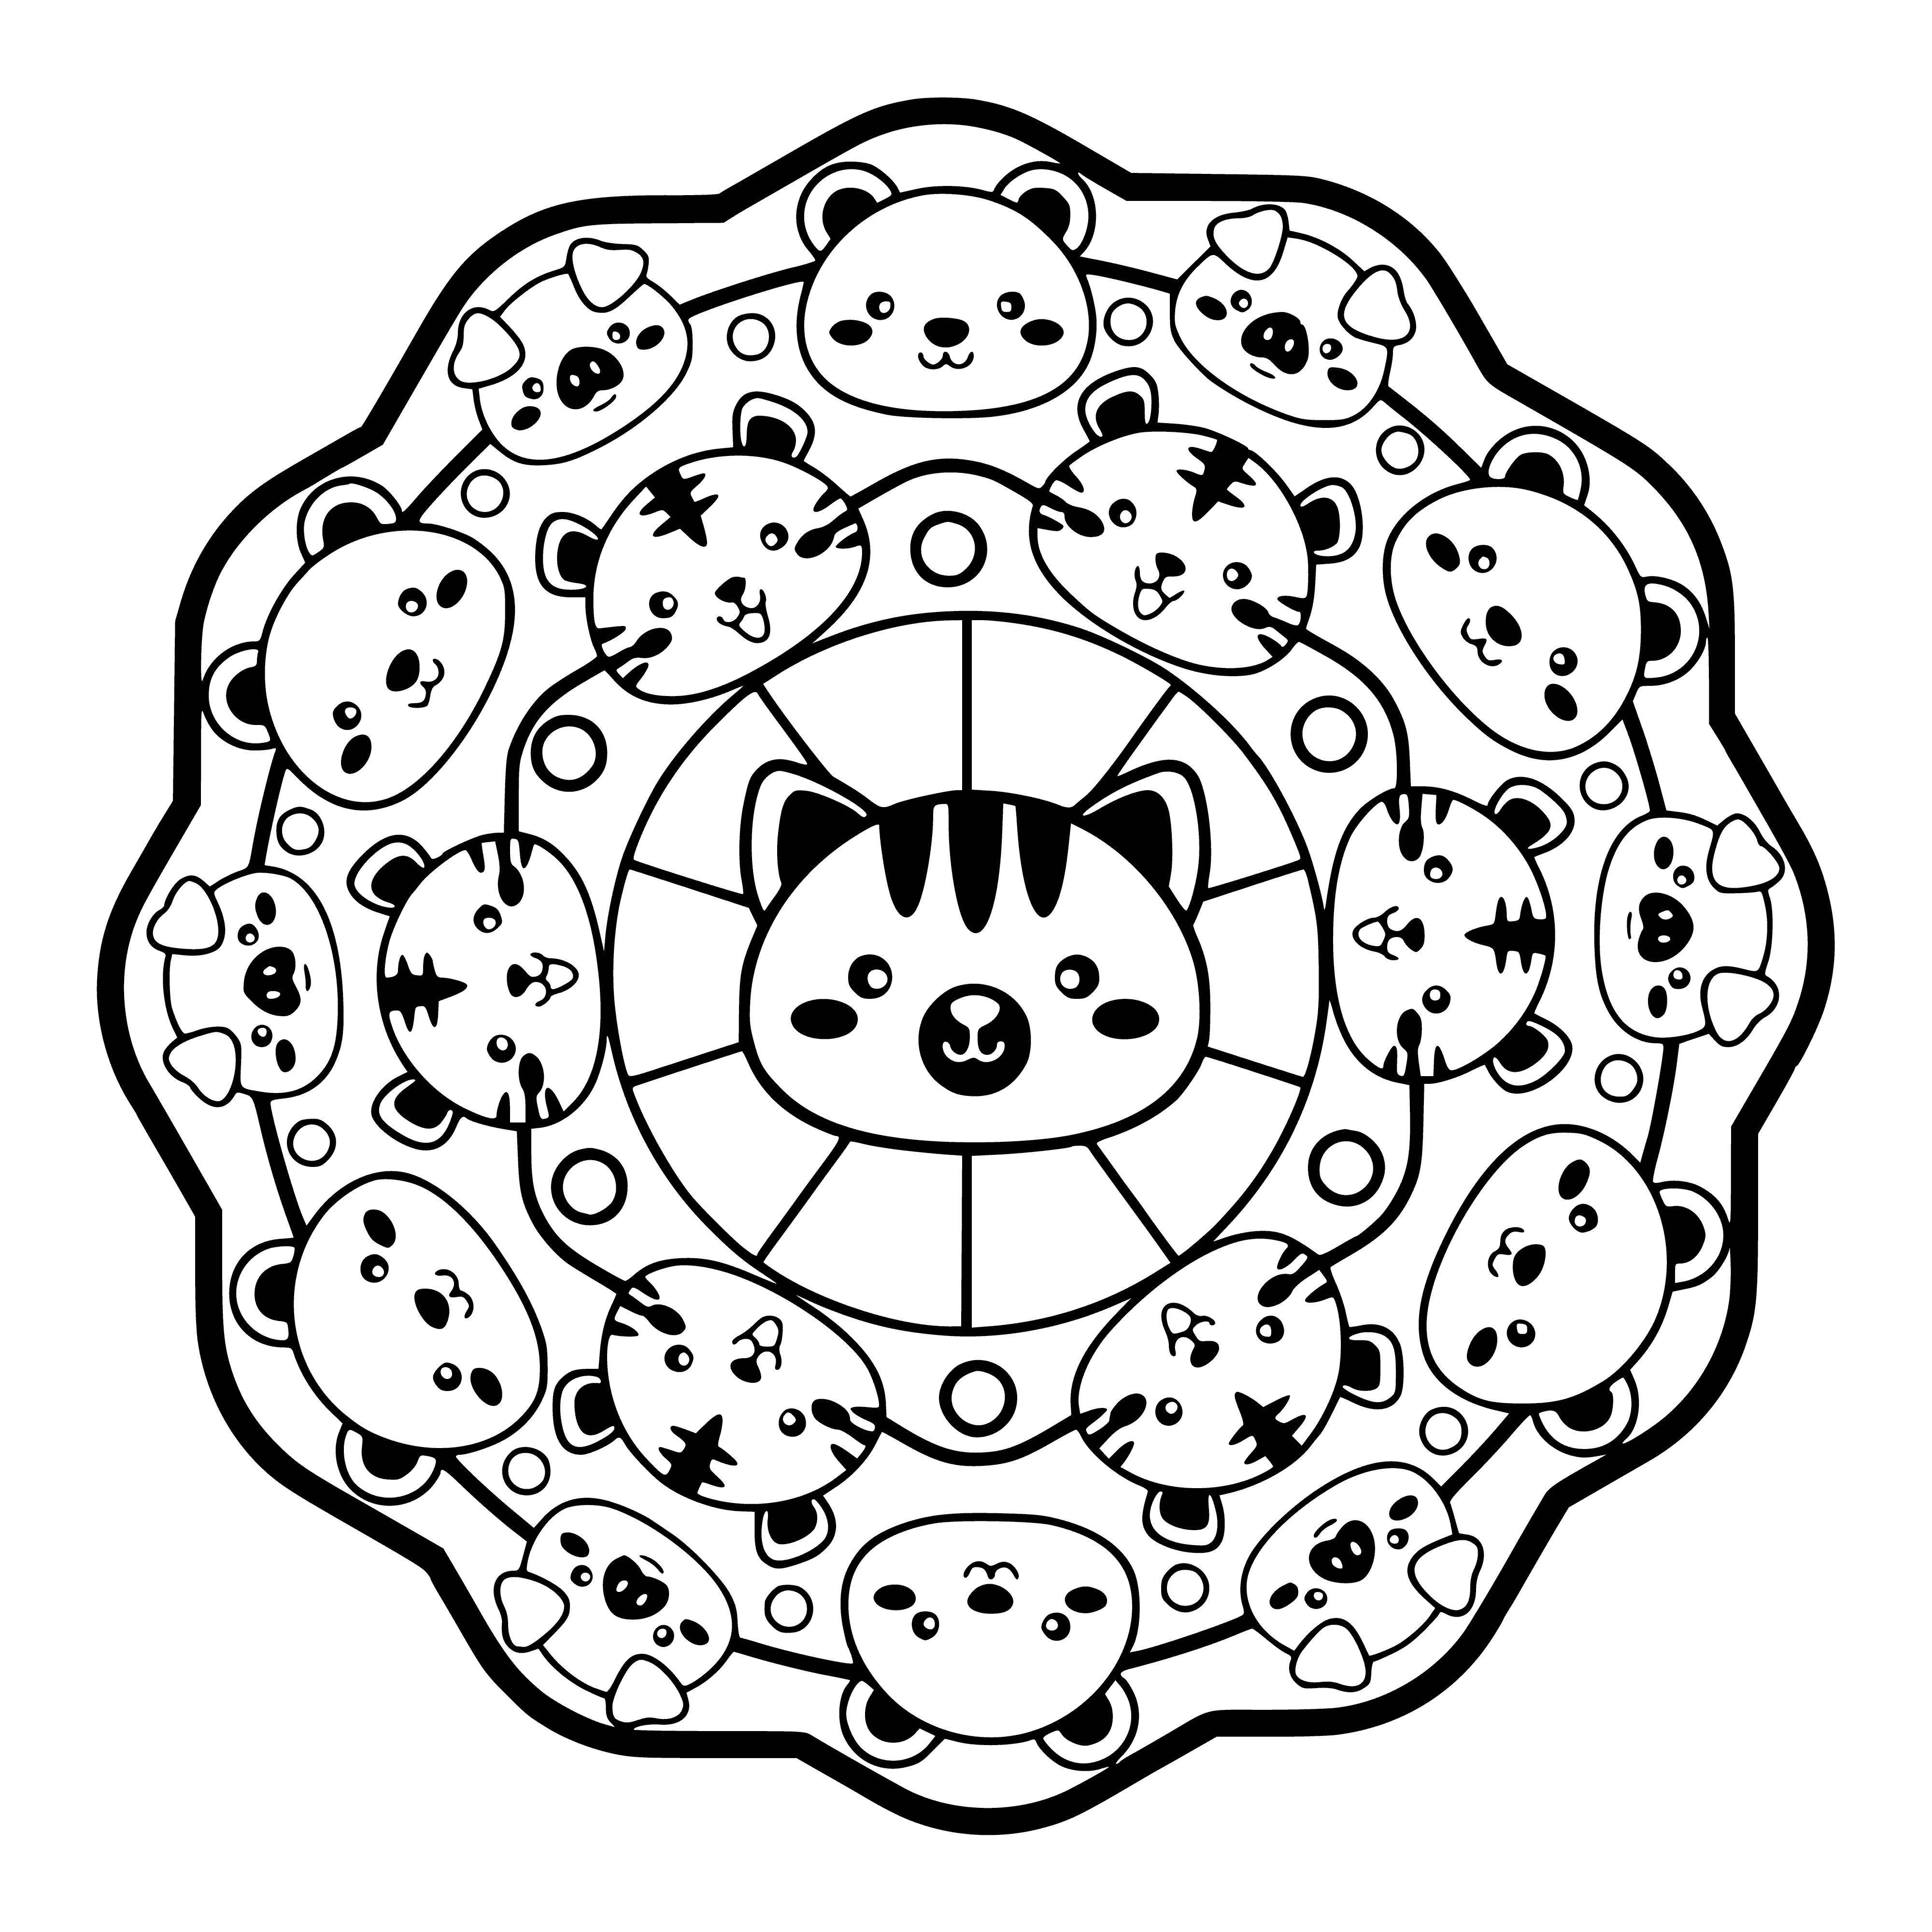 coloring page: A mandala featuring animals is typically a symmetrical circular design centered around a main animal, with the rest filled with other animals.